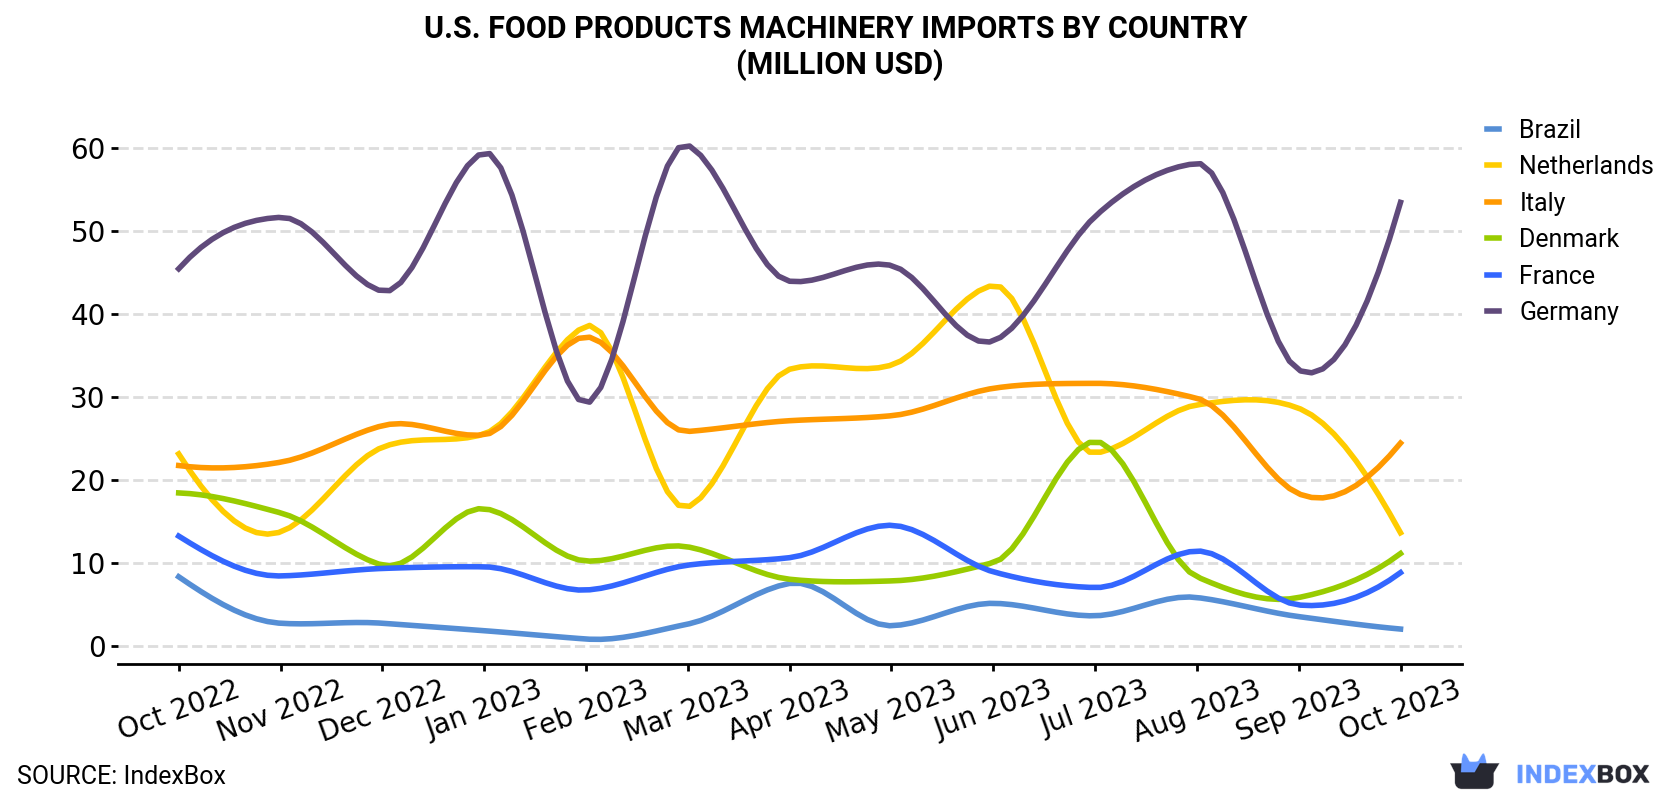 U.S. Food Products Machinery Imports By Country (Million USD)